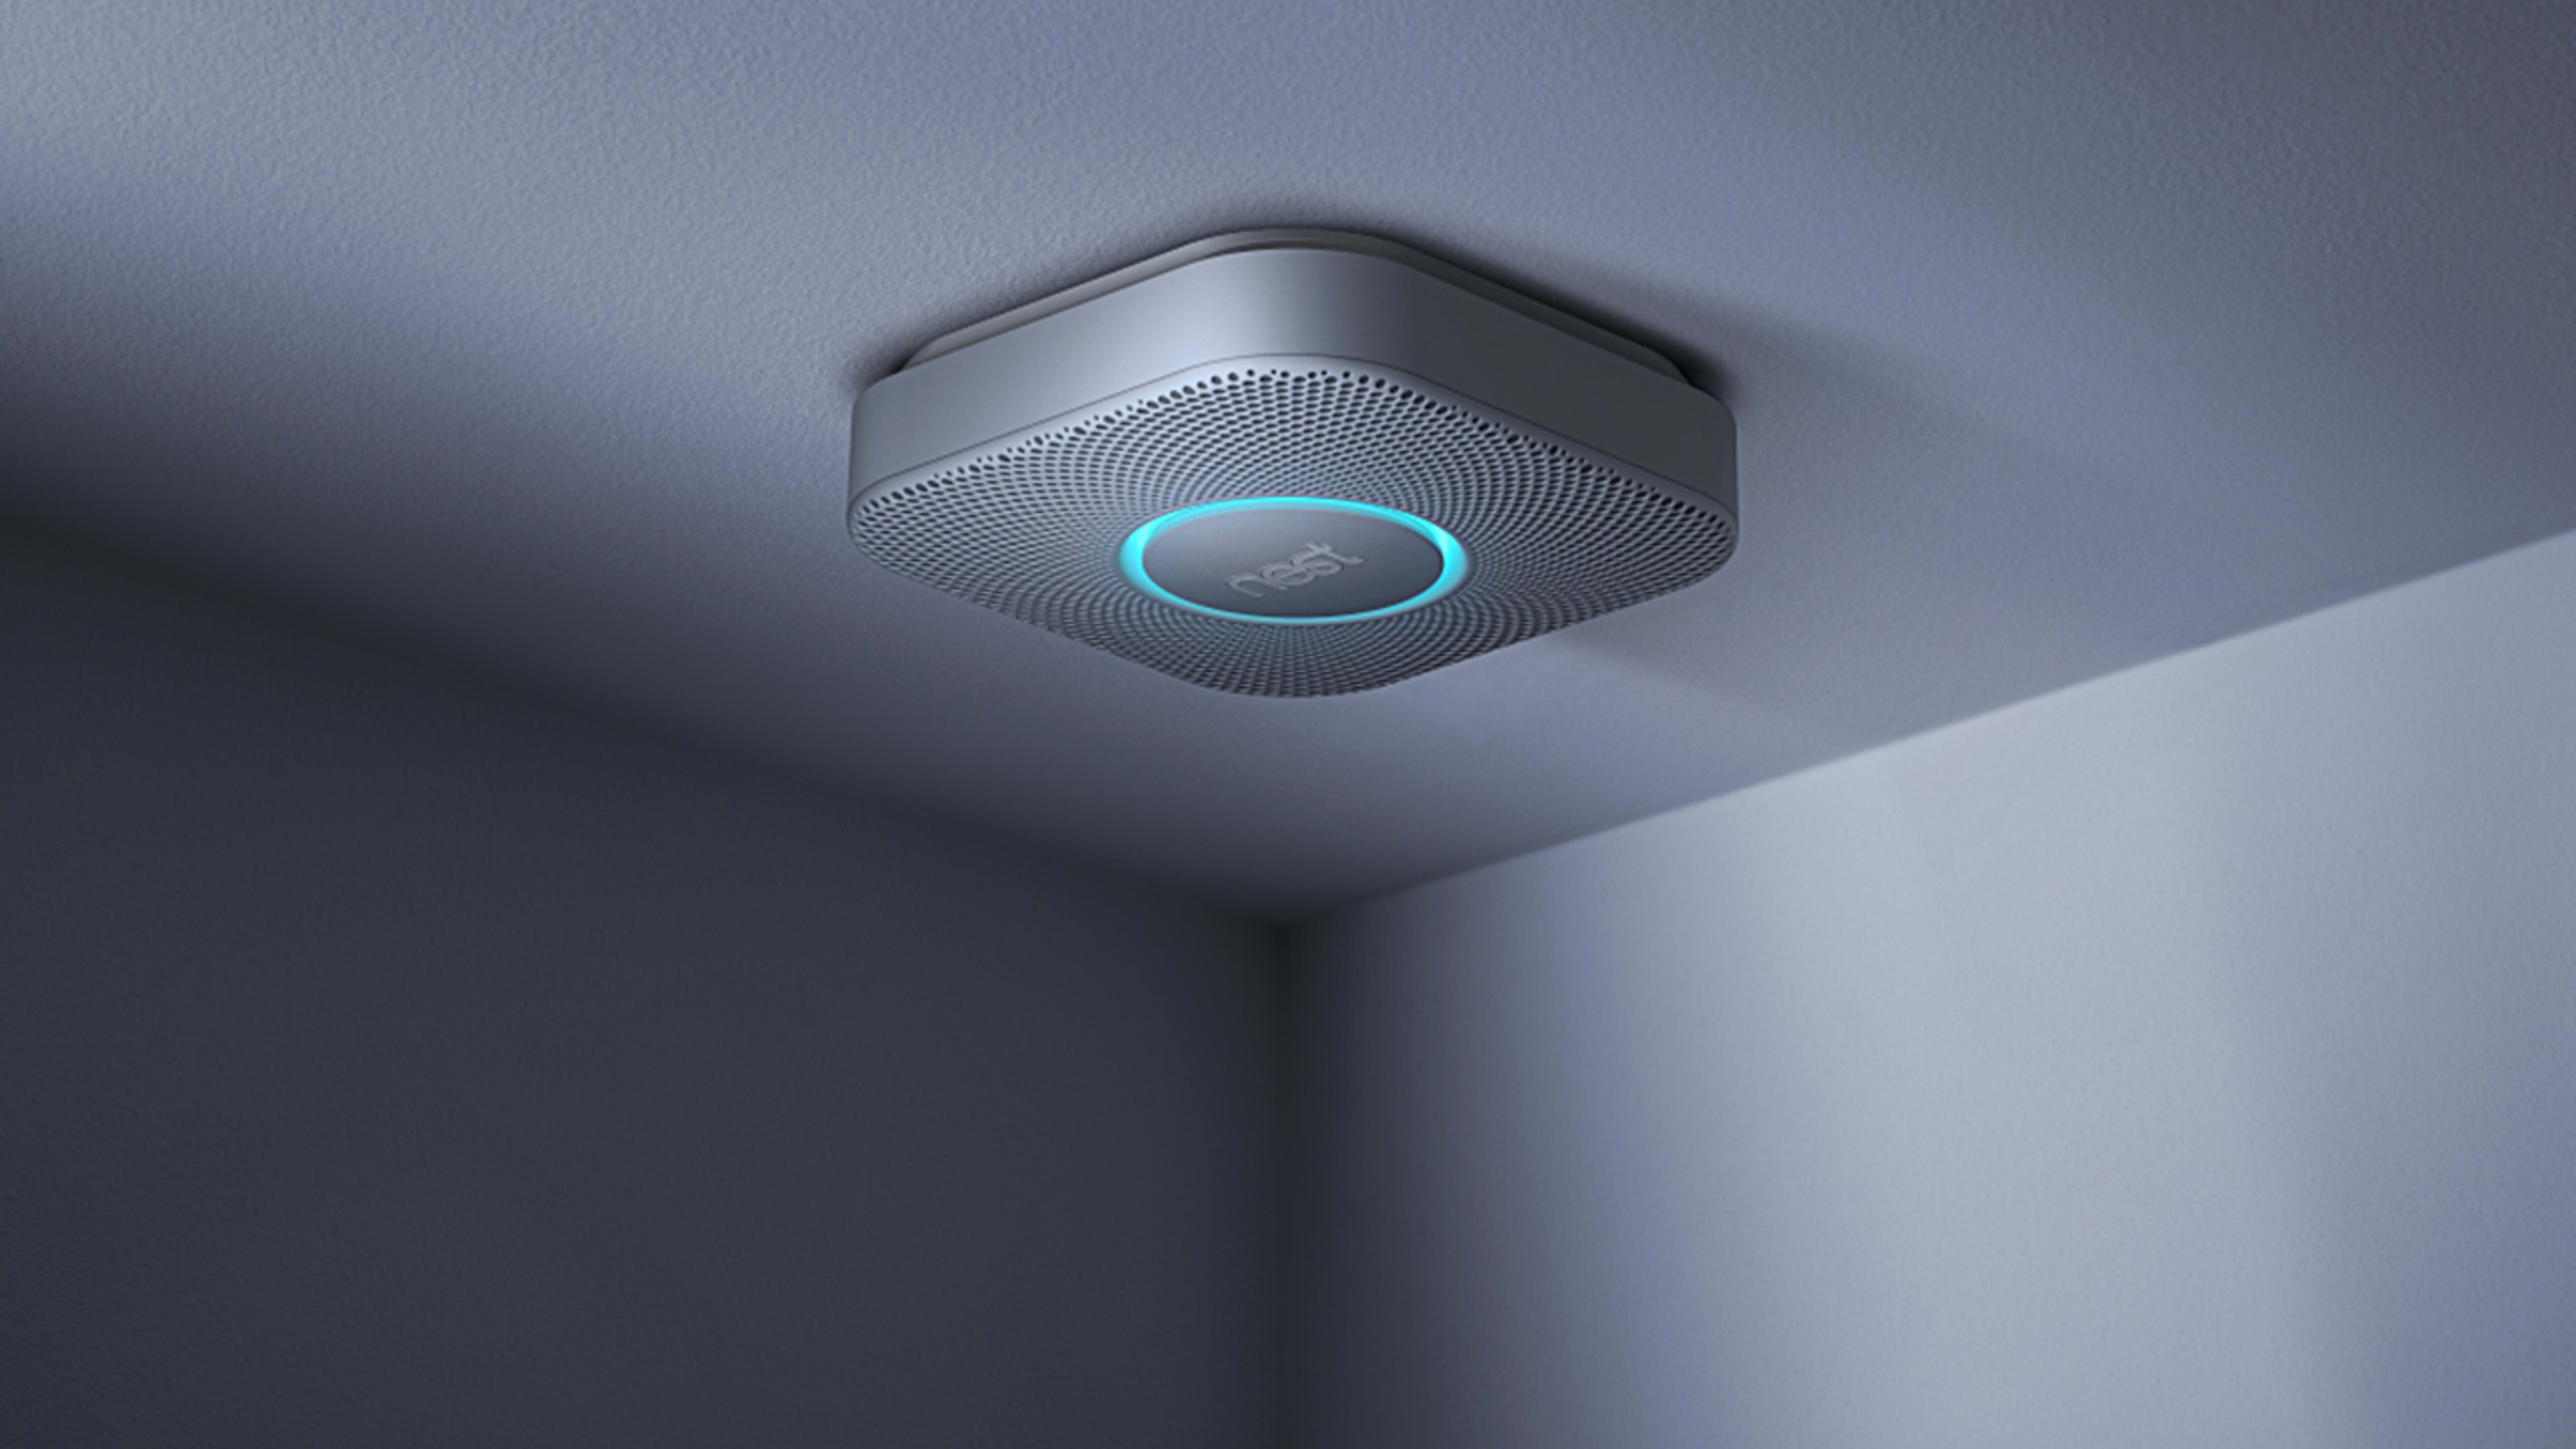 Nest Reinvents The Smoke Detector With Less False-Alarm Hassle